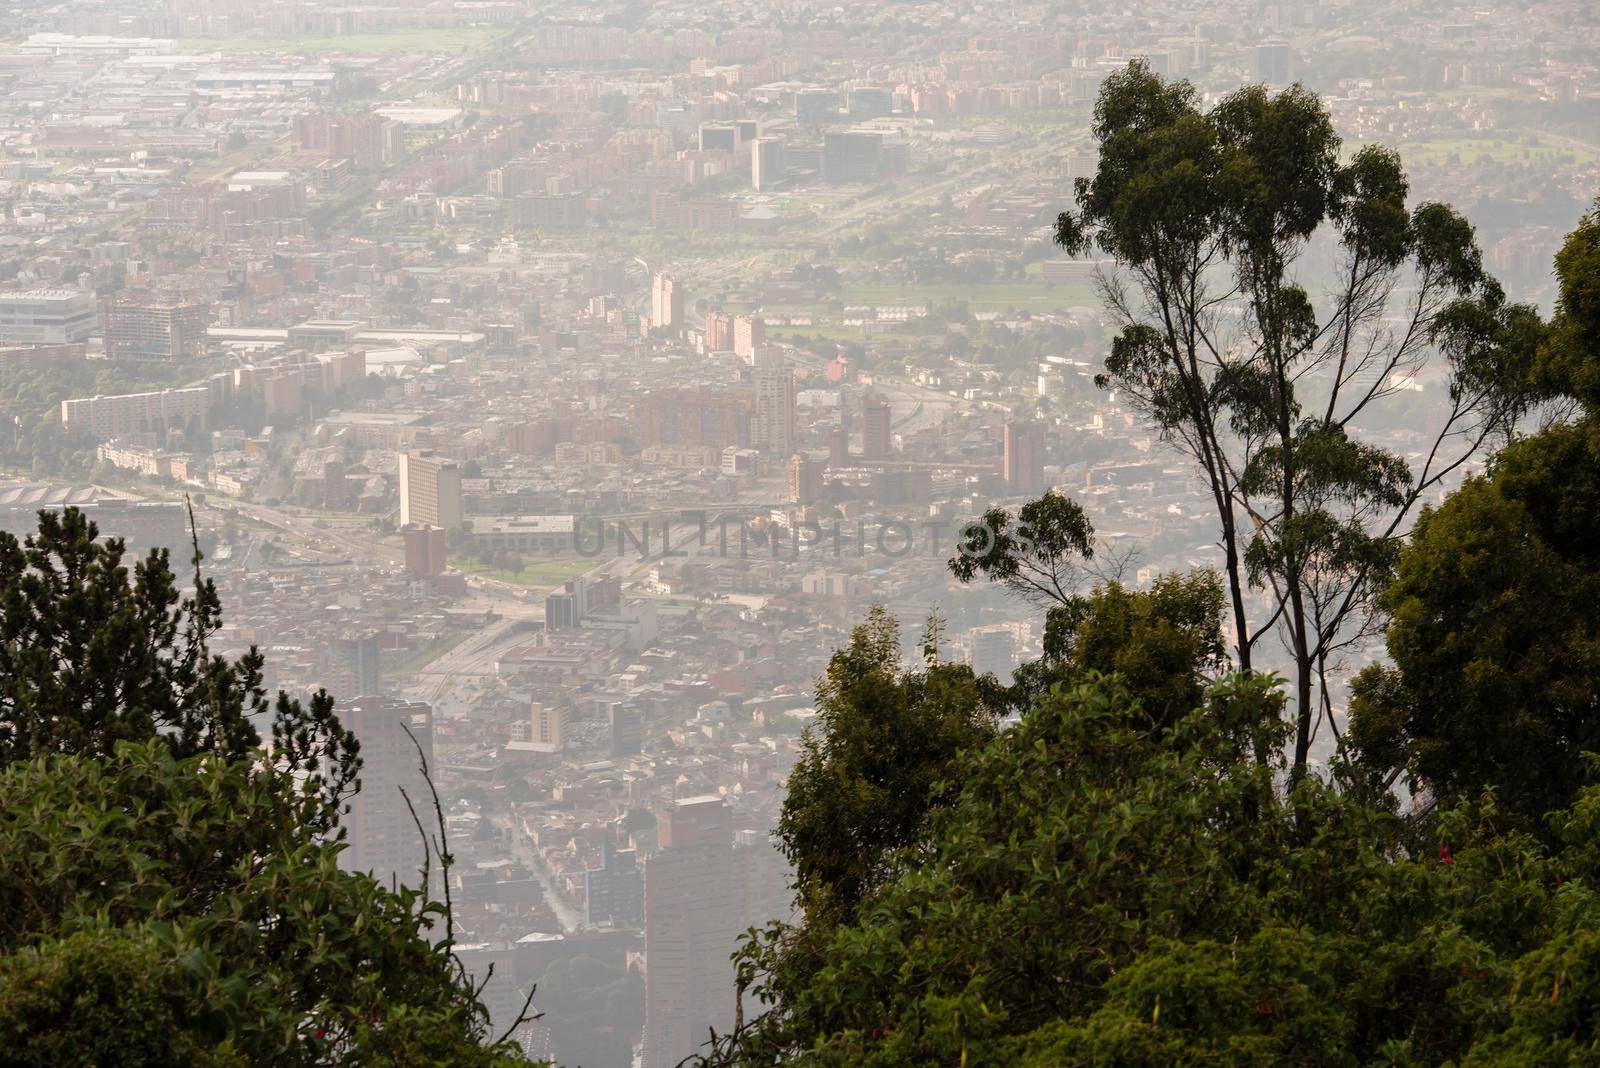 View through trees from the top of Mount Montserrate in Bogota Colombia.